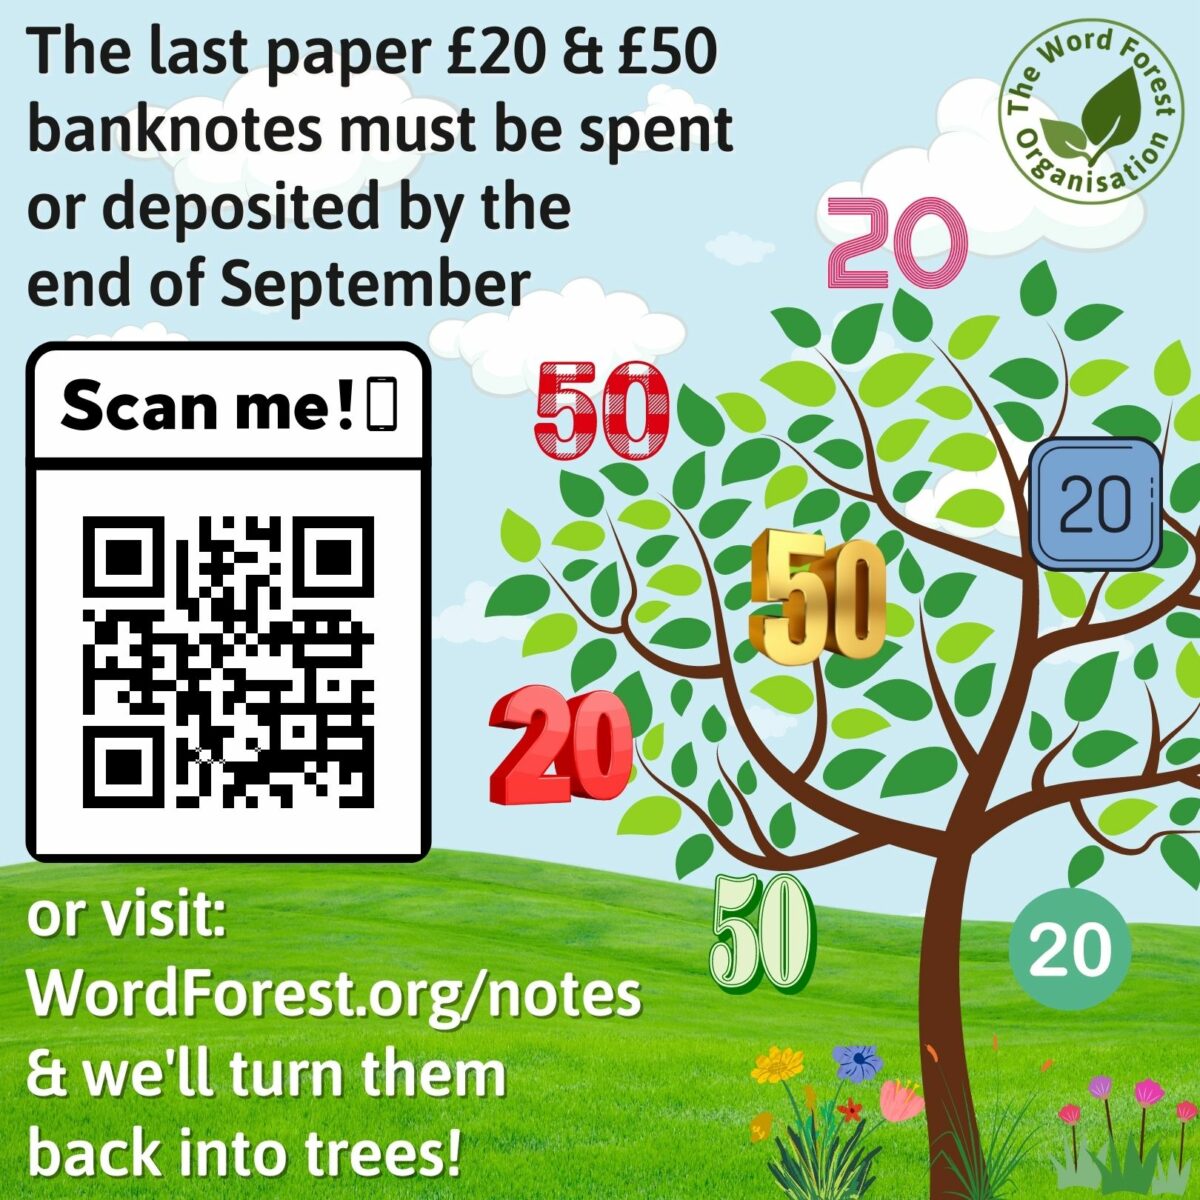 Poster to turn banknotes into trees